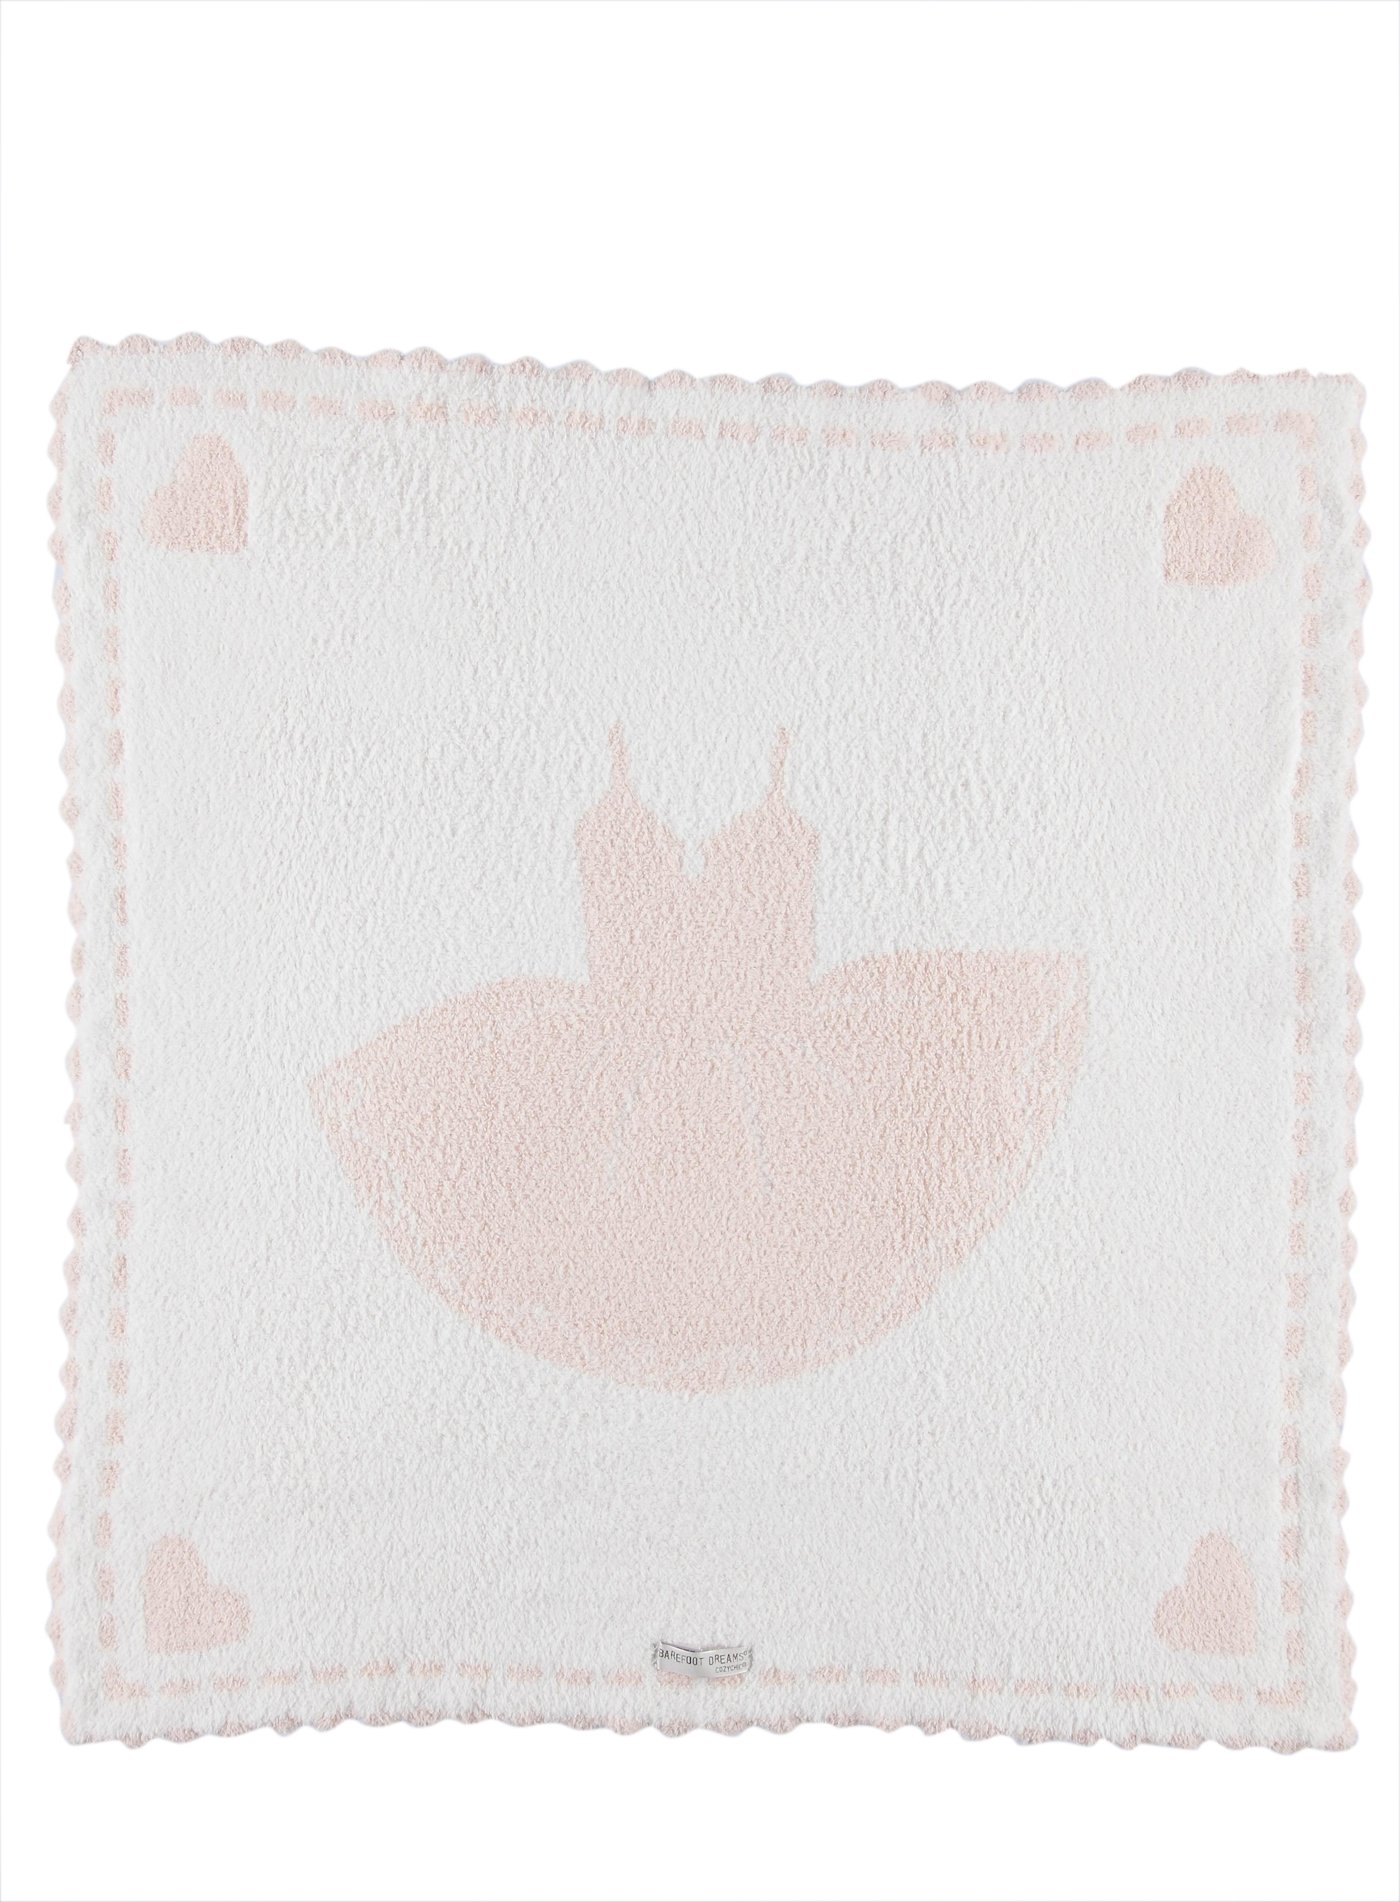 Barefoot Dreams CozyChic Scalloped Receiving Blanket - Pink & Tutu,30